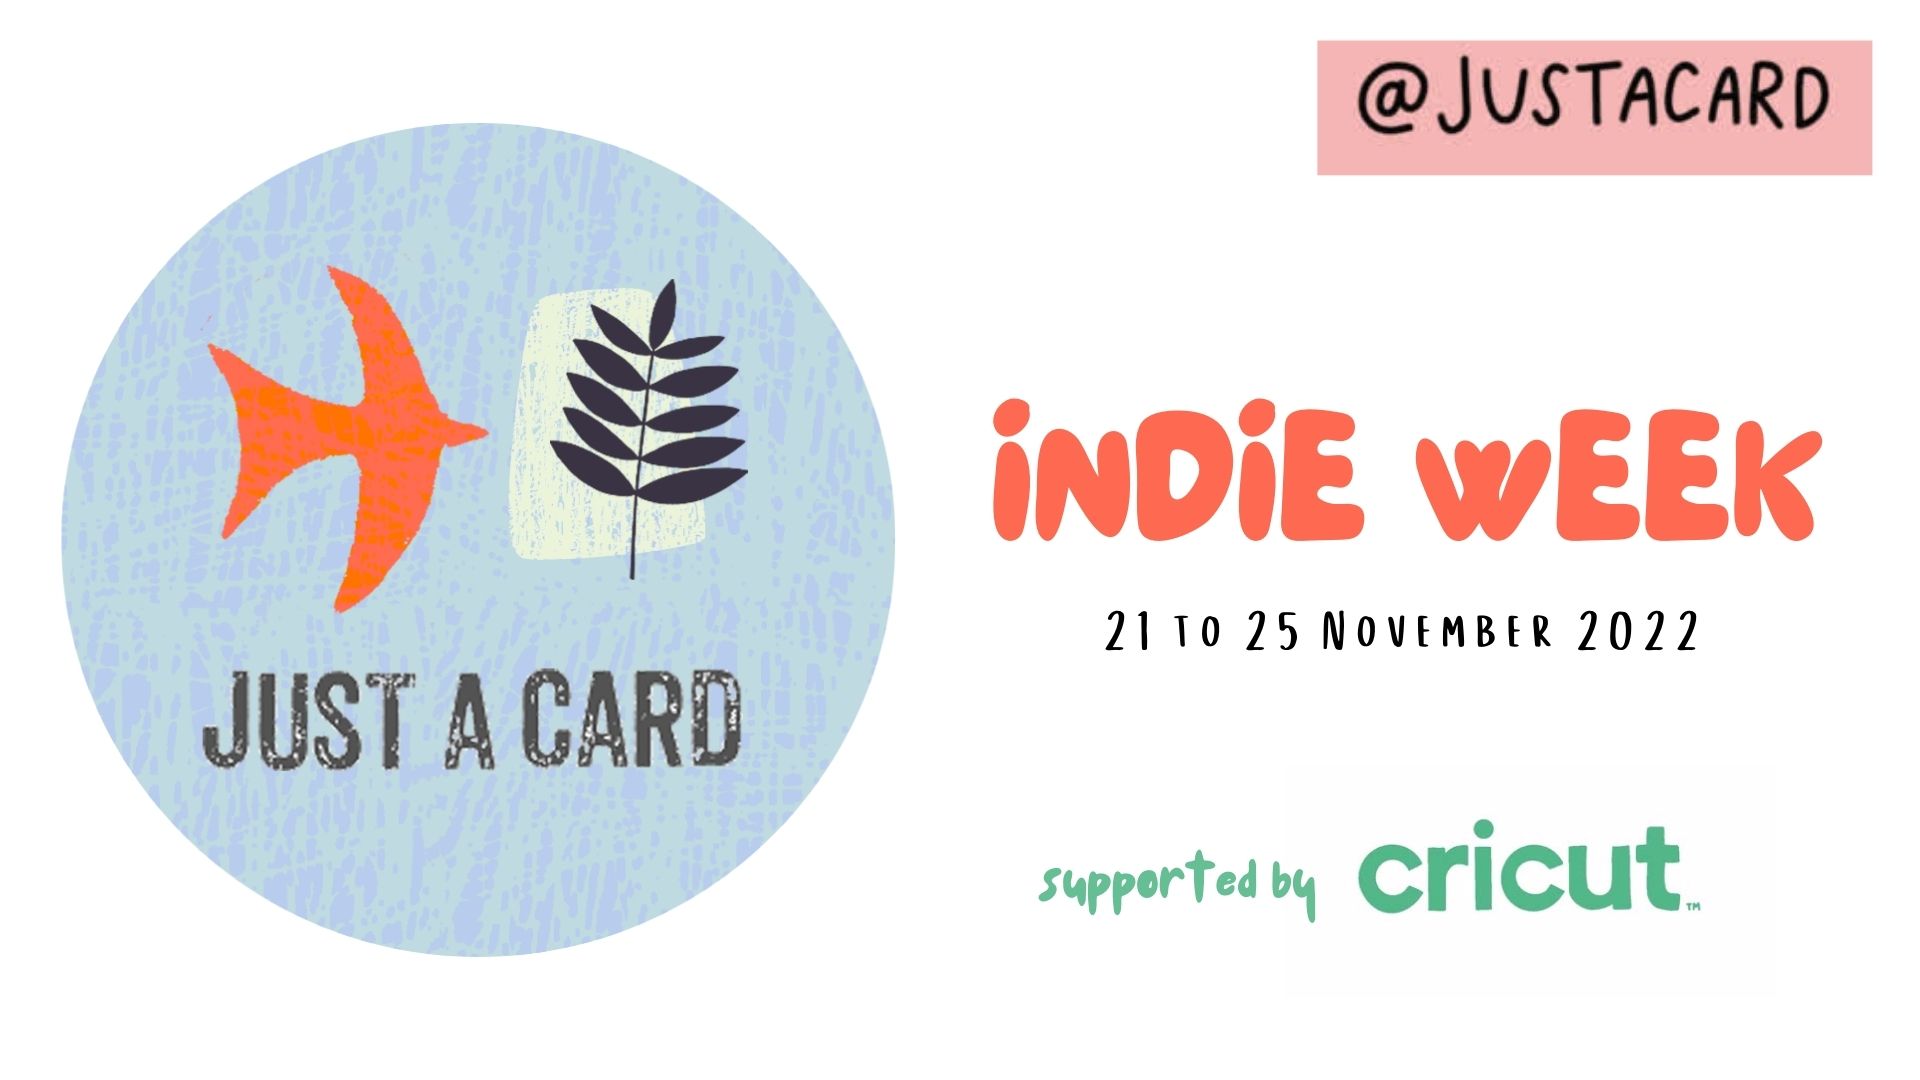 Cricut supports Just a Card - Indie Week 2022